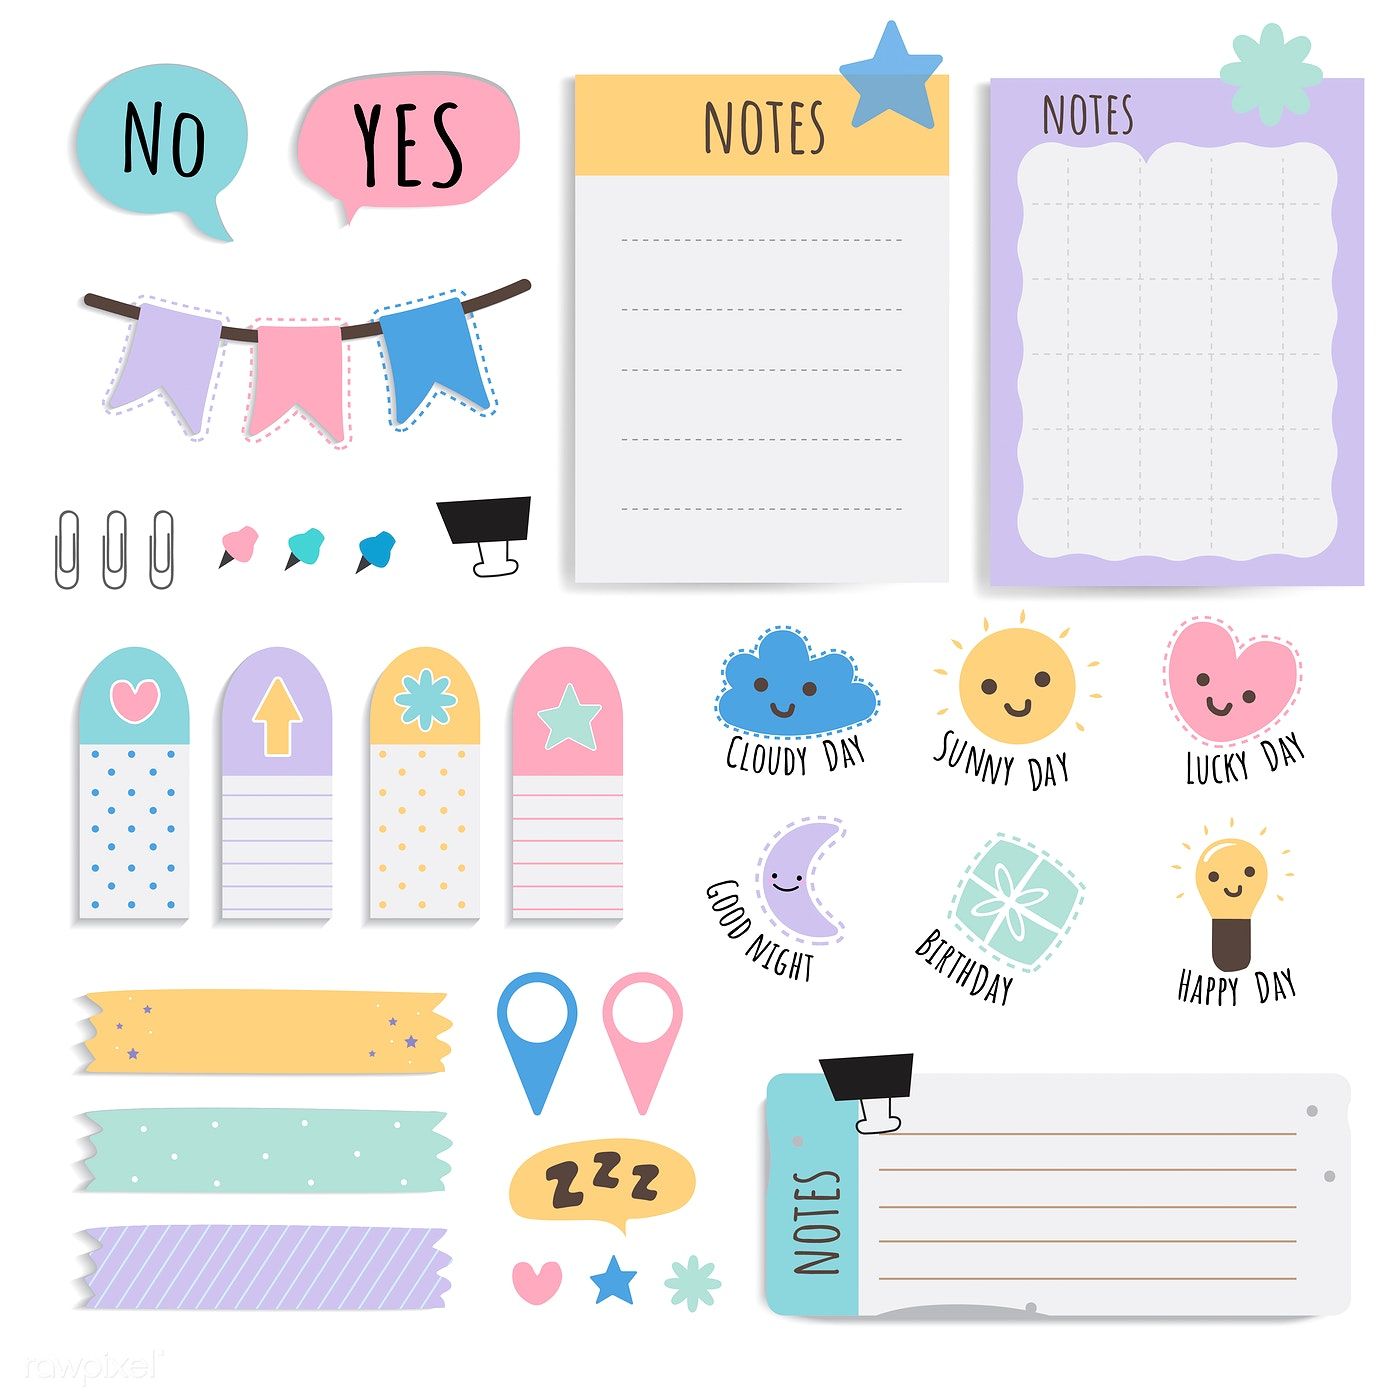 Notes clipart cute Notes cute Transparent FREE for download on